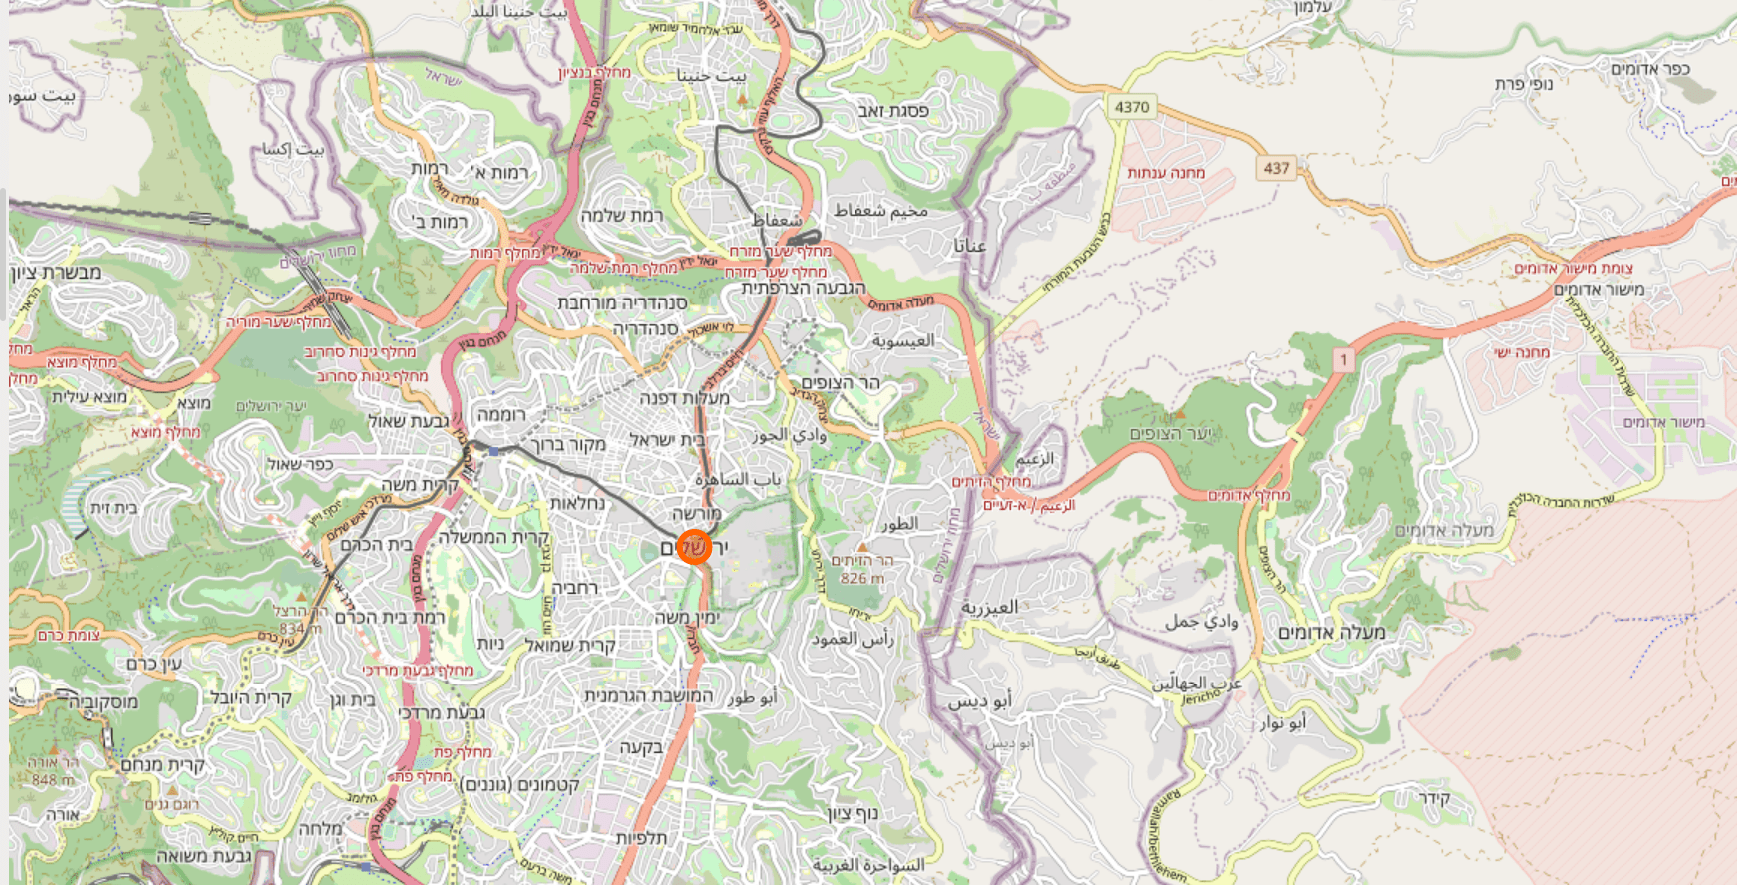 An OpenStreetMap map showing the naming of locations in either Hebrew or Arabic